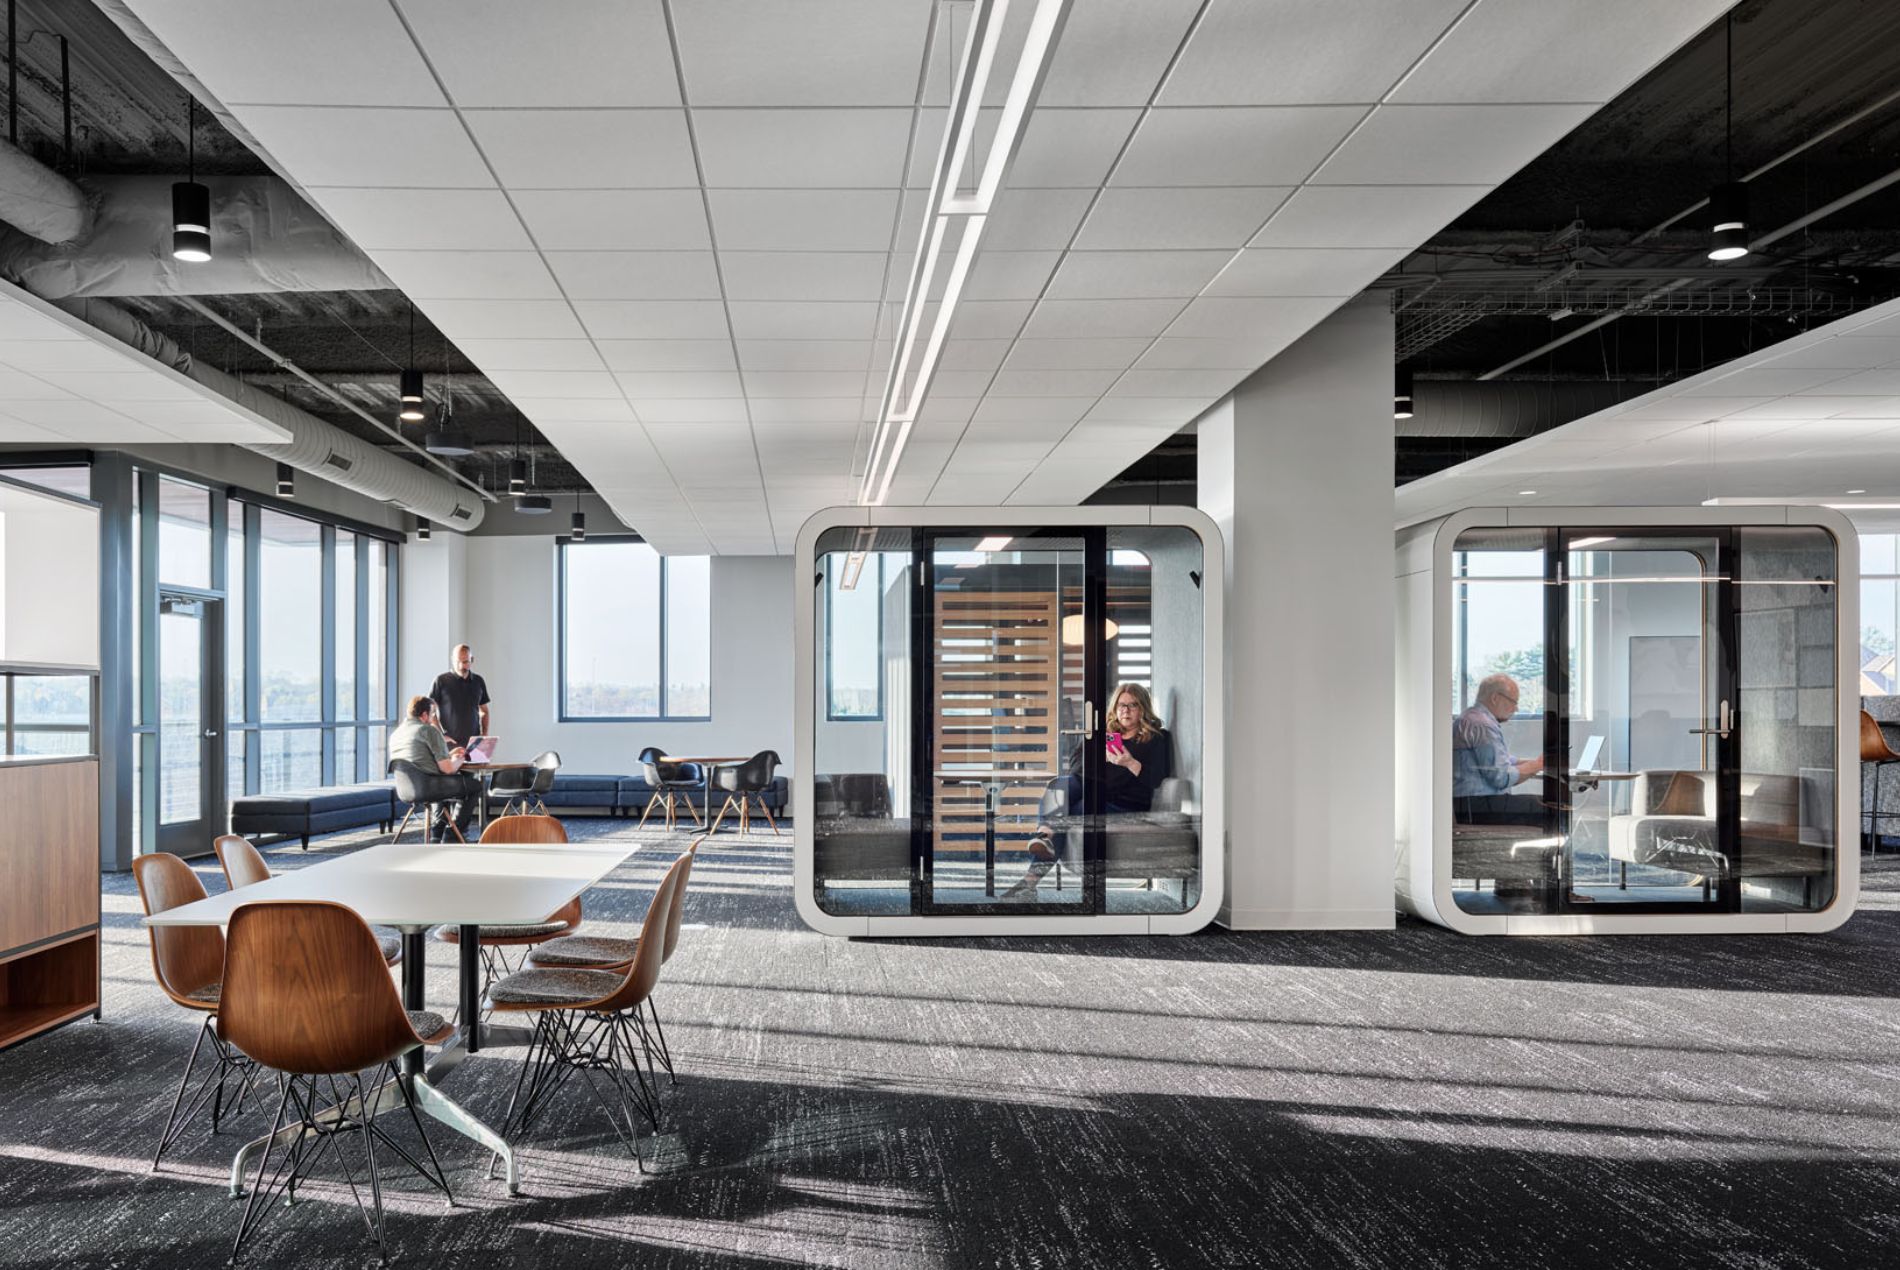 Hagerty Workplace + Experience Center - HOK